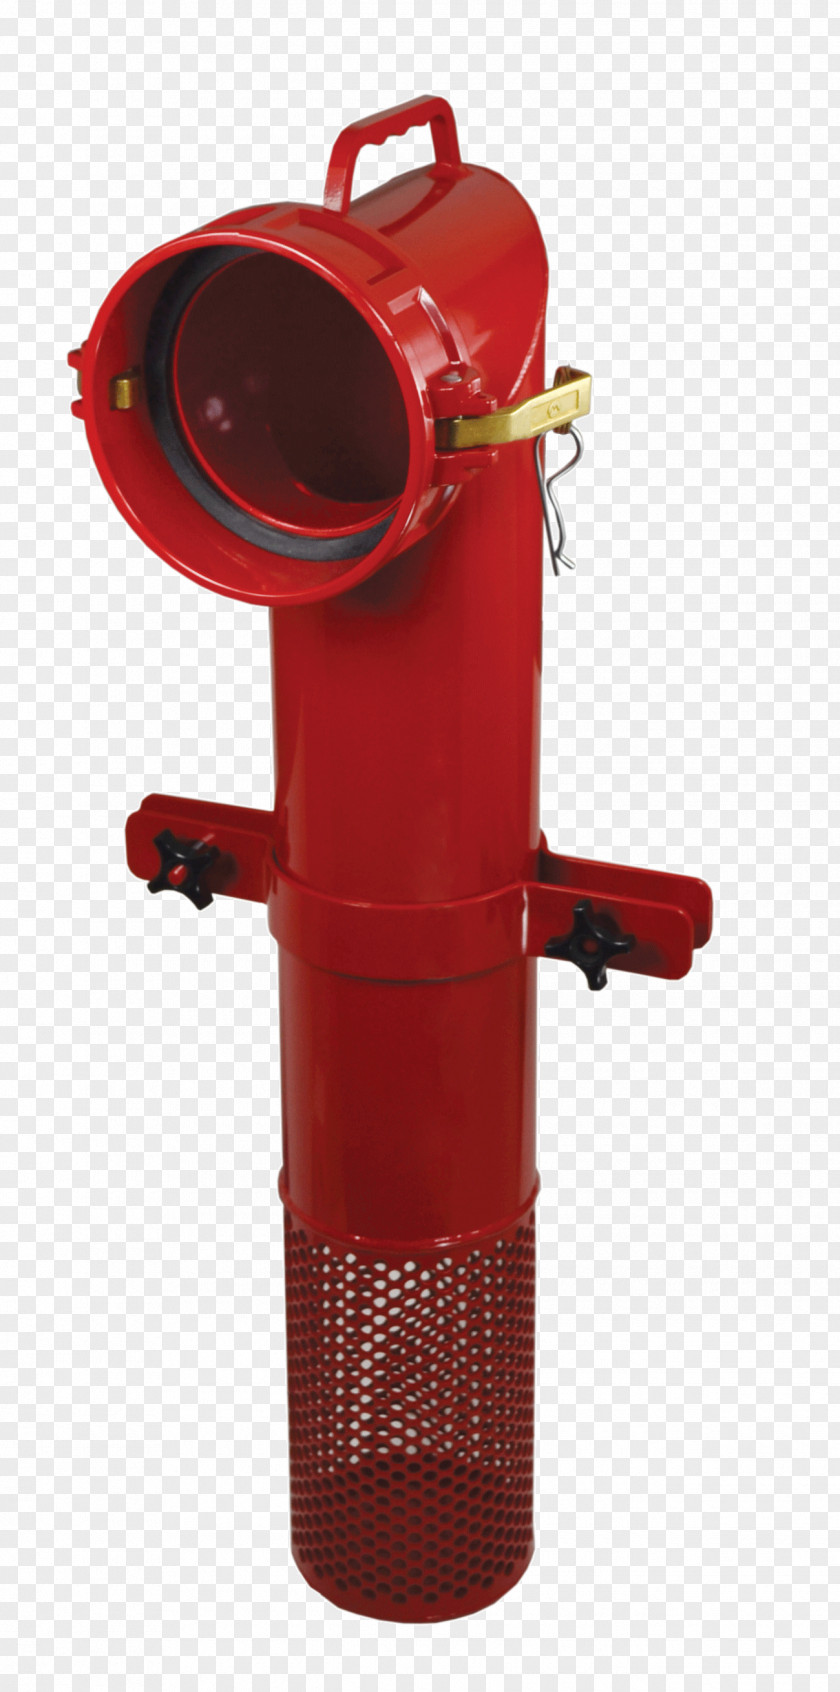 Whole Barrels Product Fire Hydrant Manufacturing Conflagration PNG